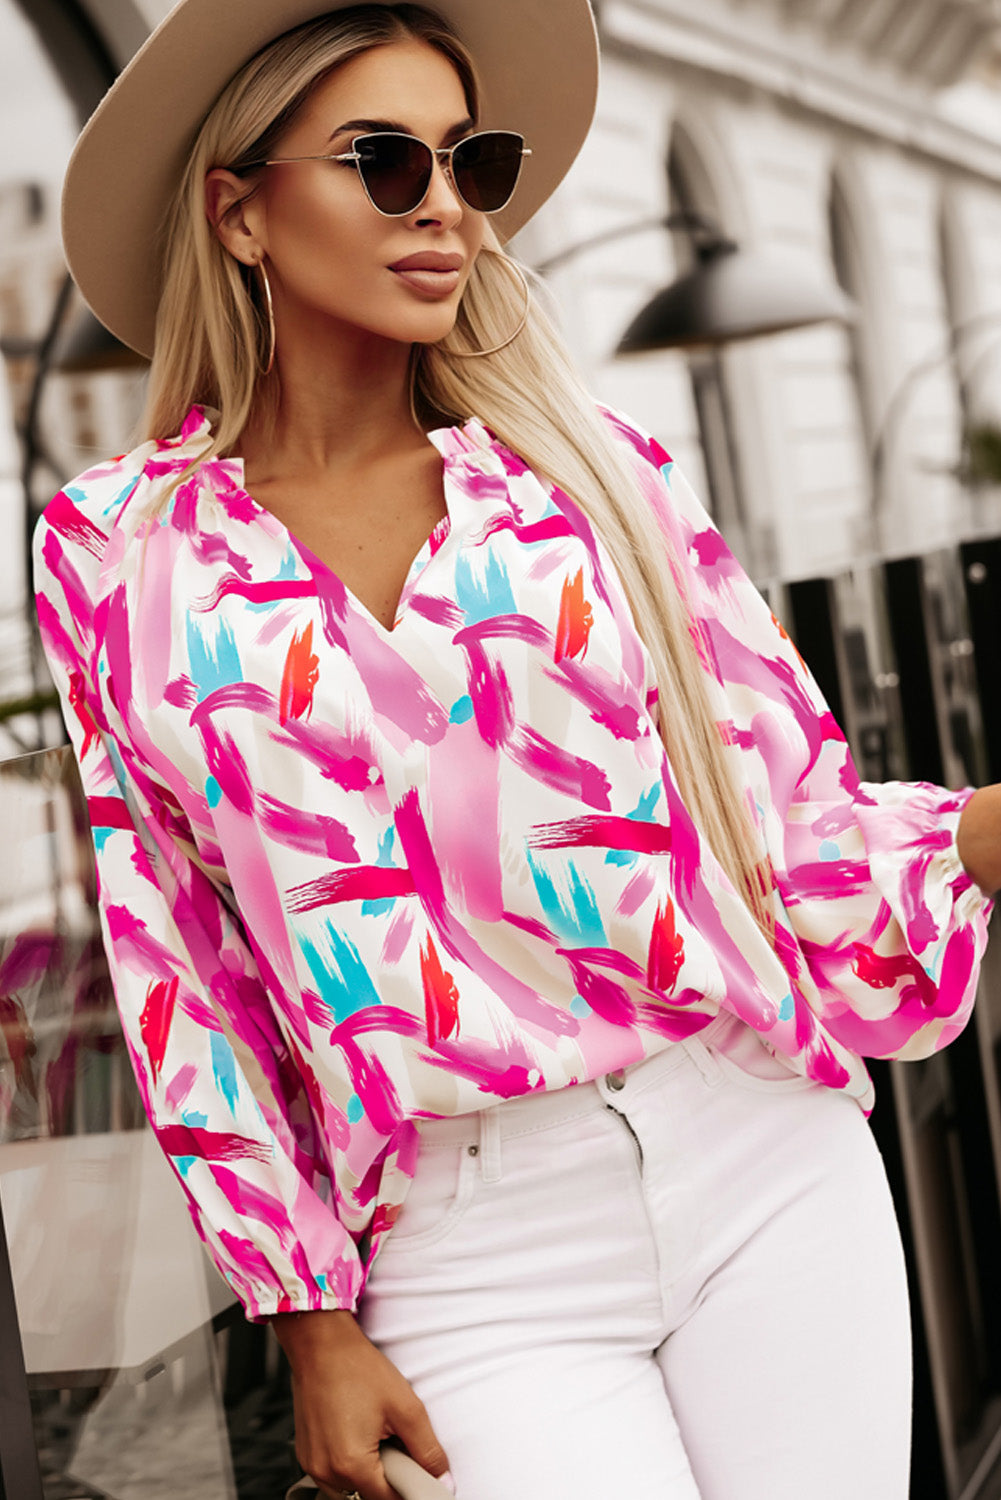 Pink Abstract Brush Print Loose Fit Blouse